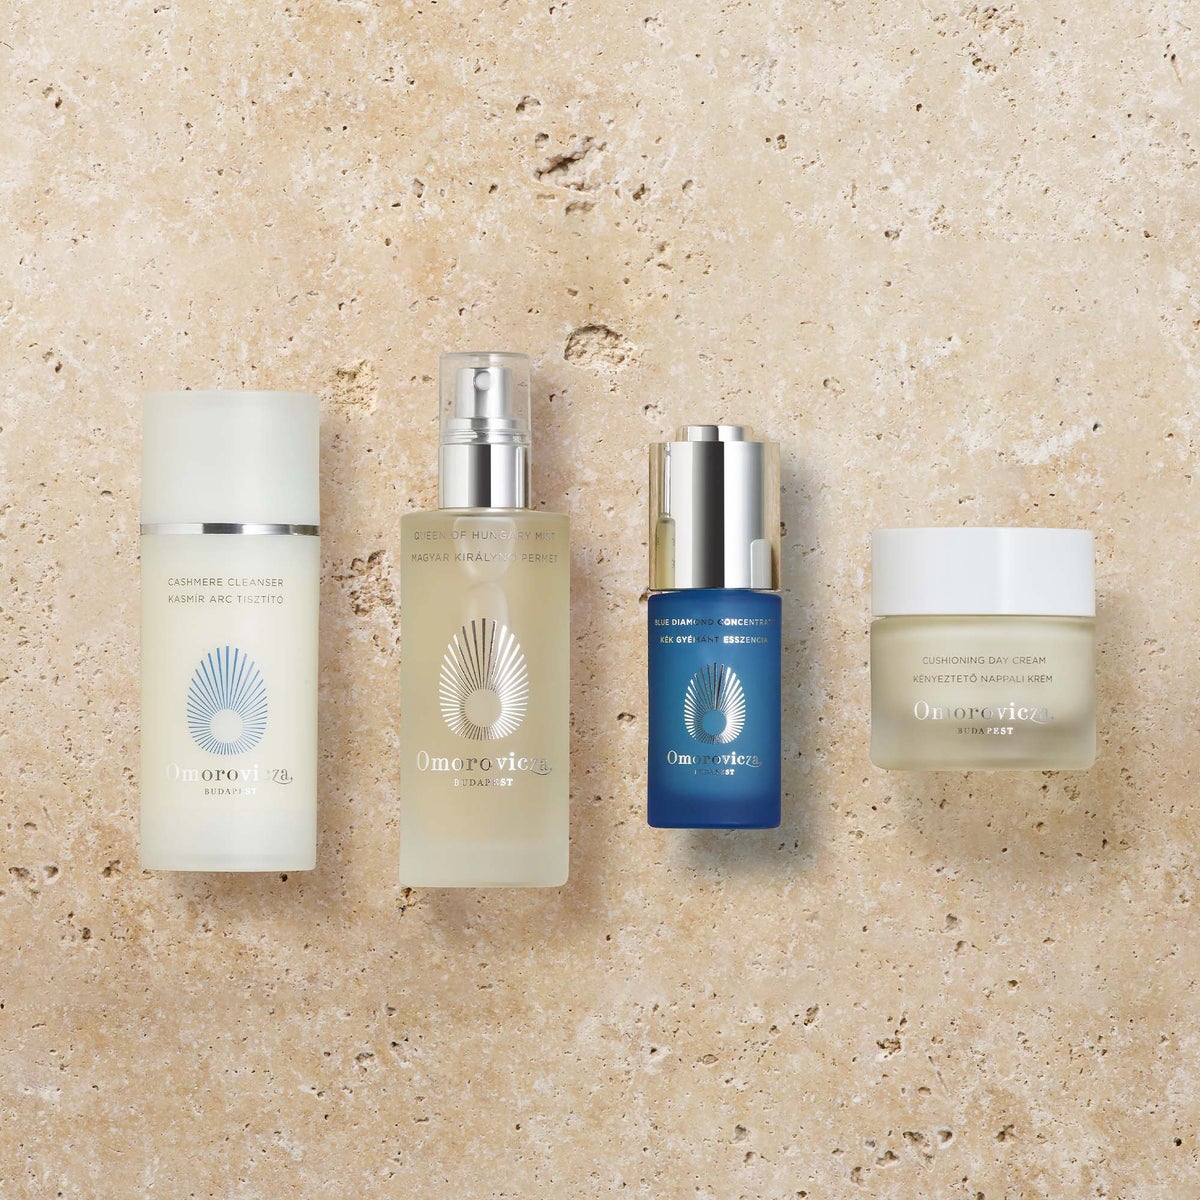 CUSHIONING DAY CREAM, cashmere cleanser, queen of hungary mist and blue diamond concentrate